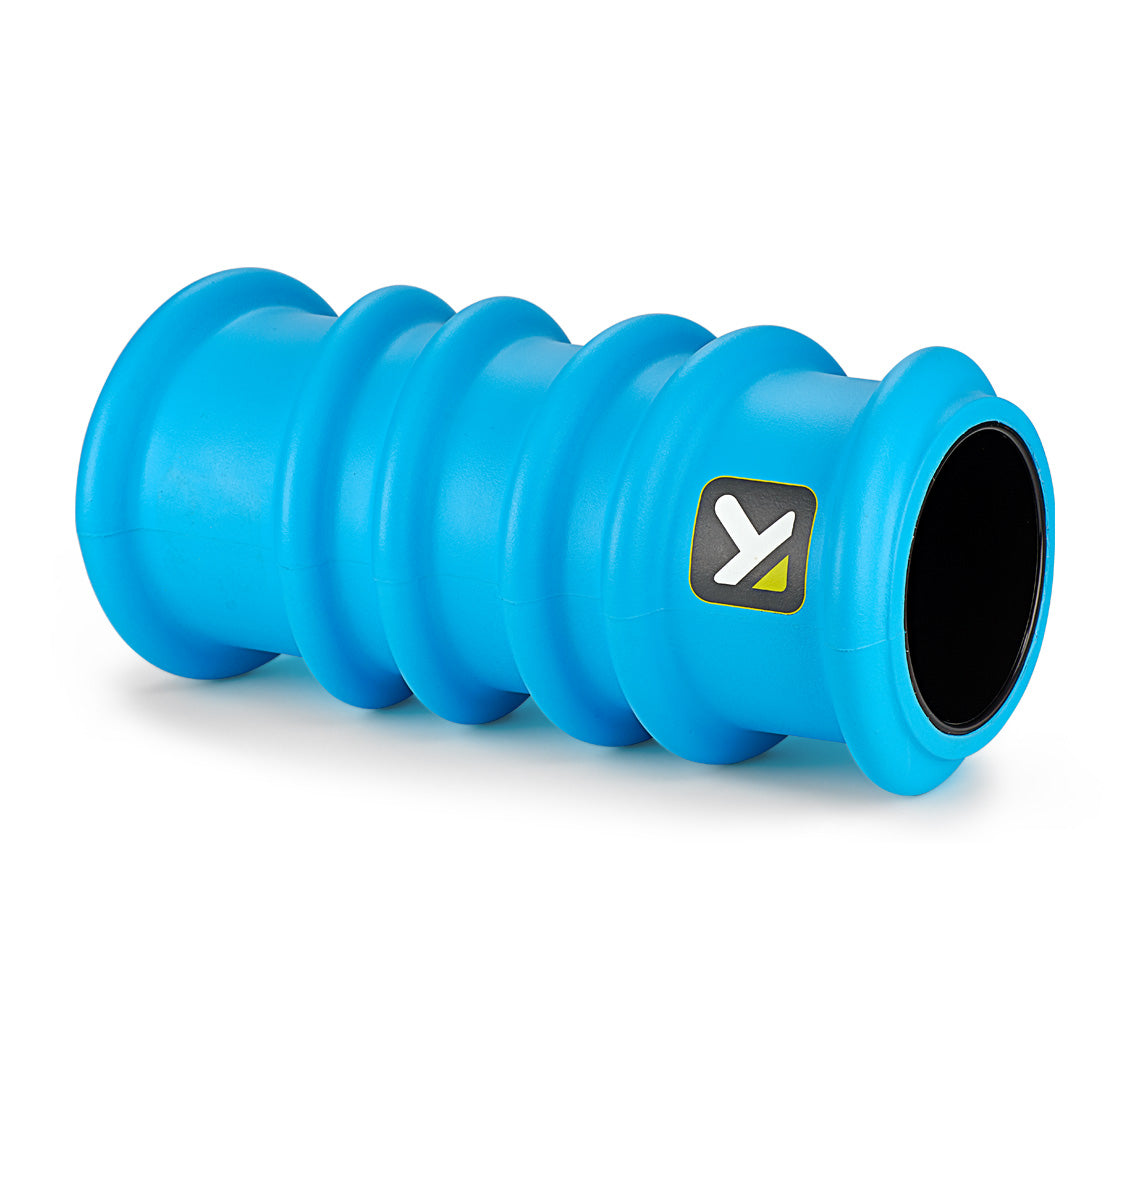 TriggerPoint Charge Foam Roller - Side